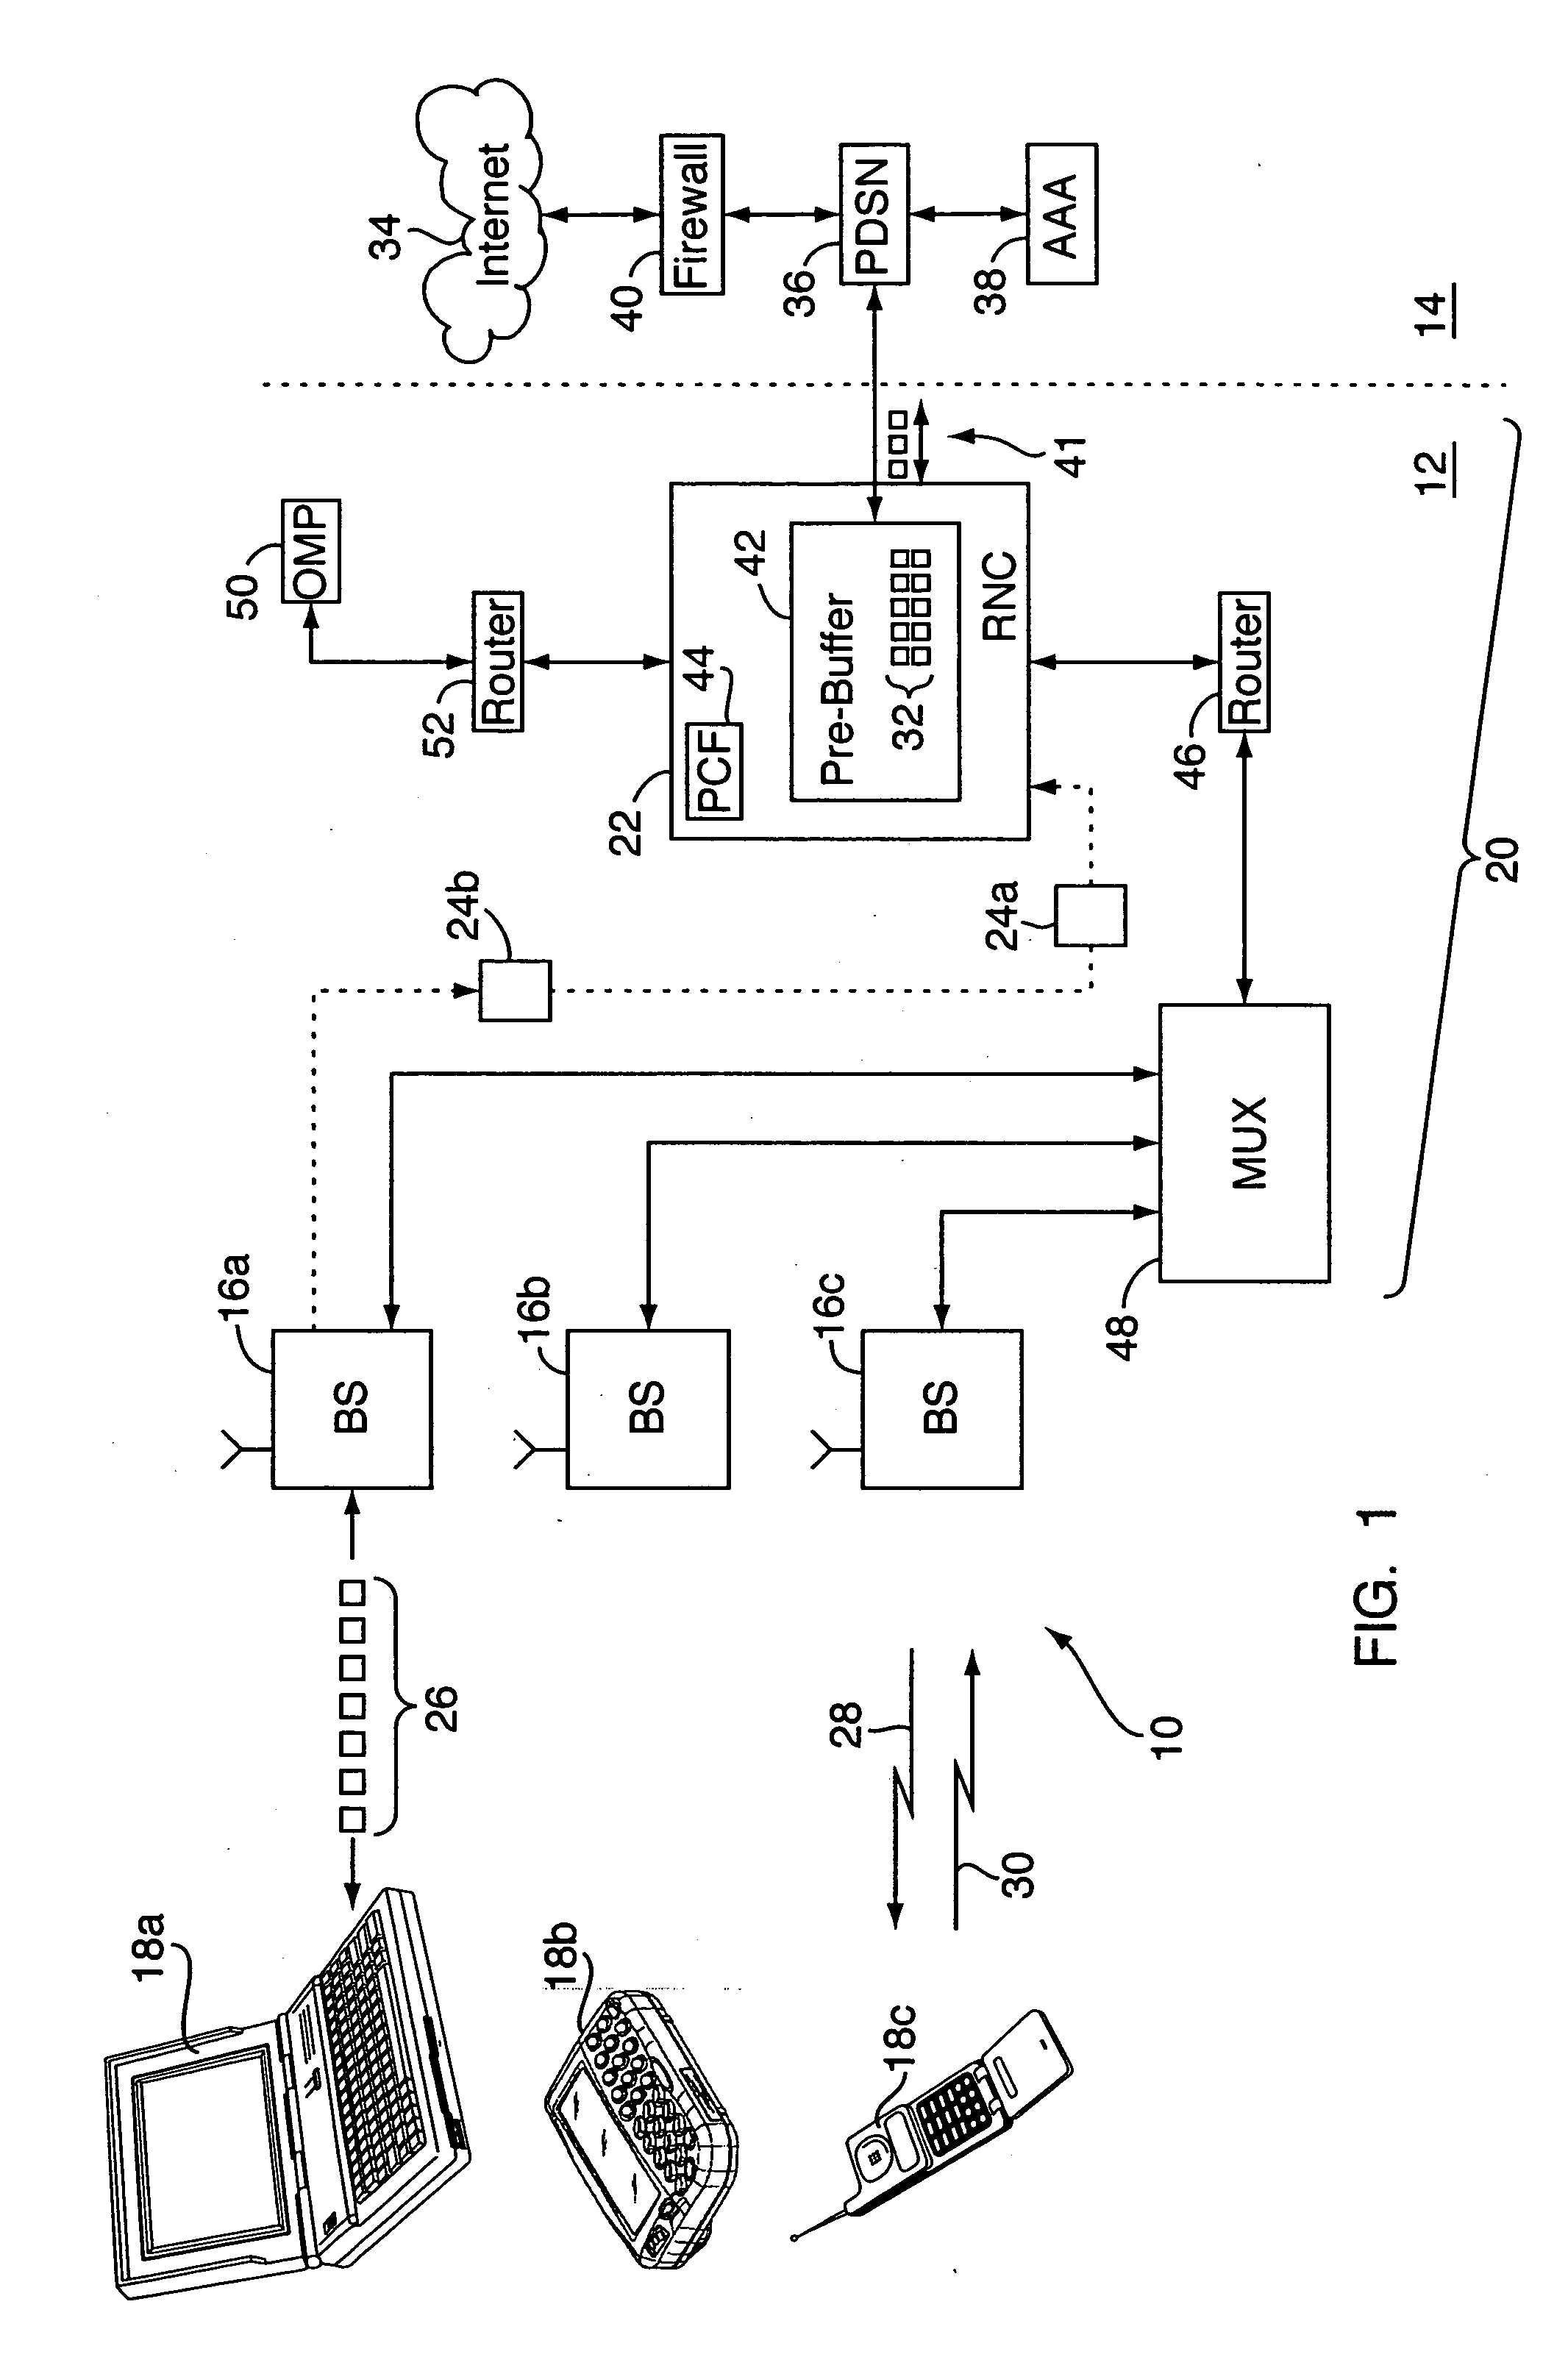 Method for measuring airlink transmission latency in a 1x-EVDO wireless network